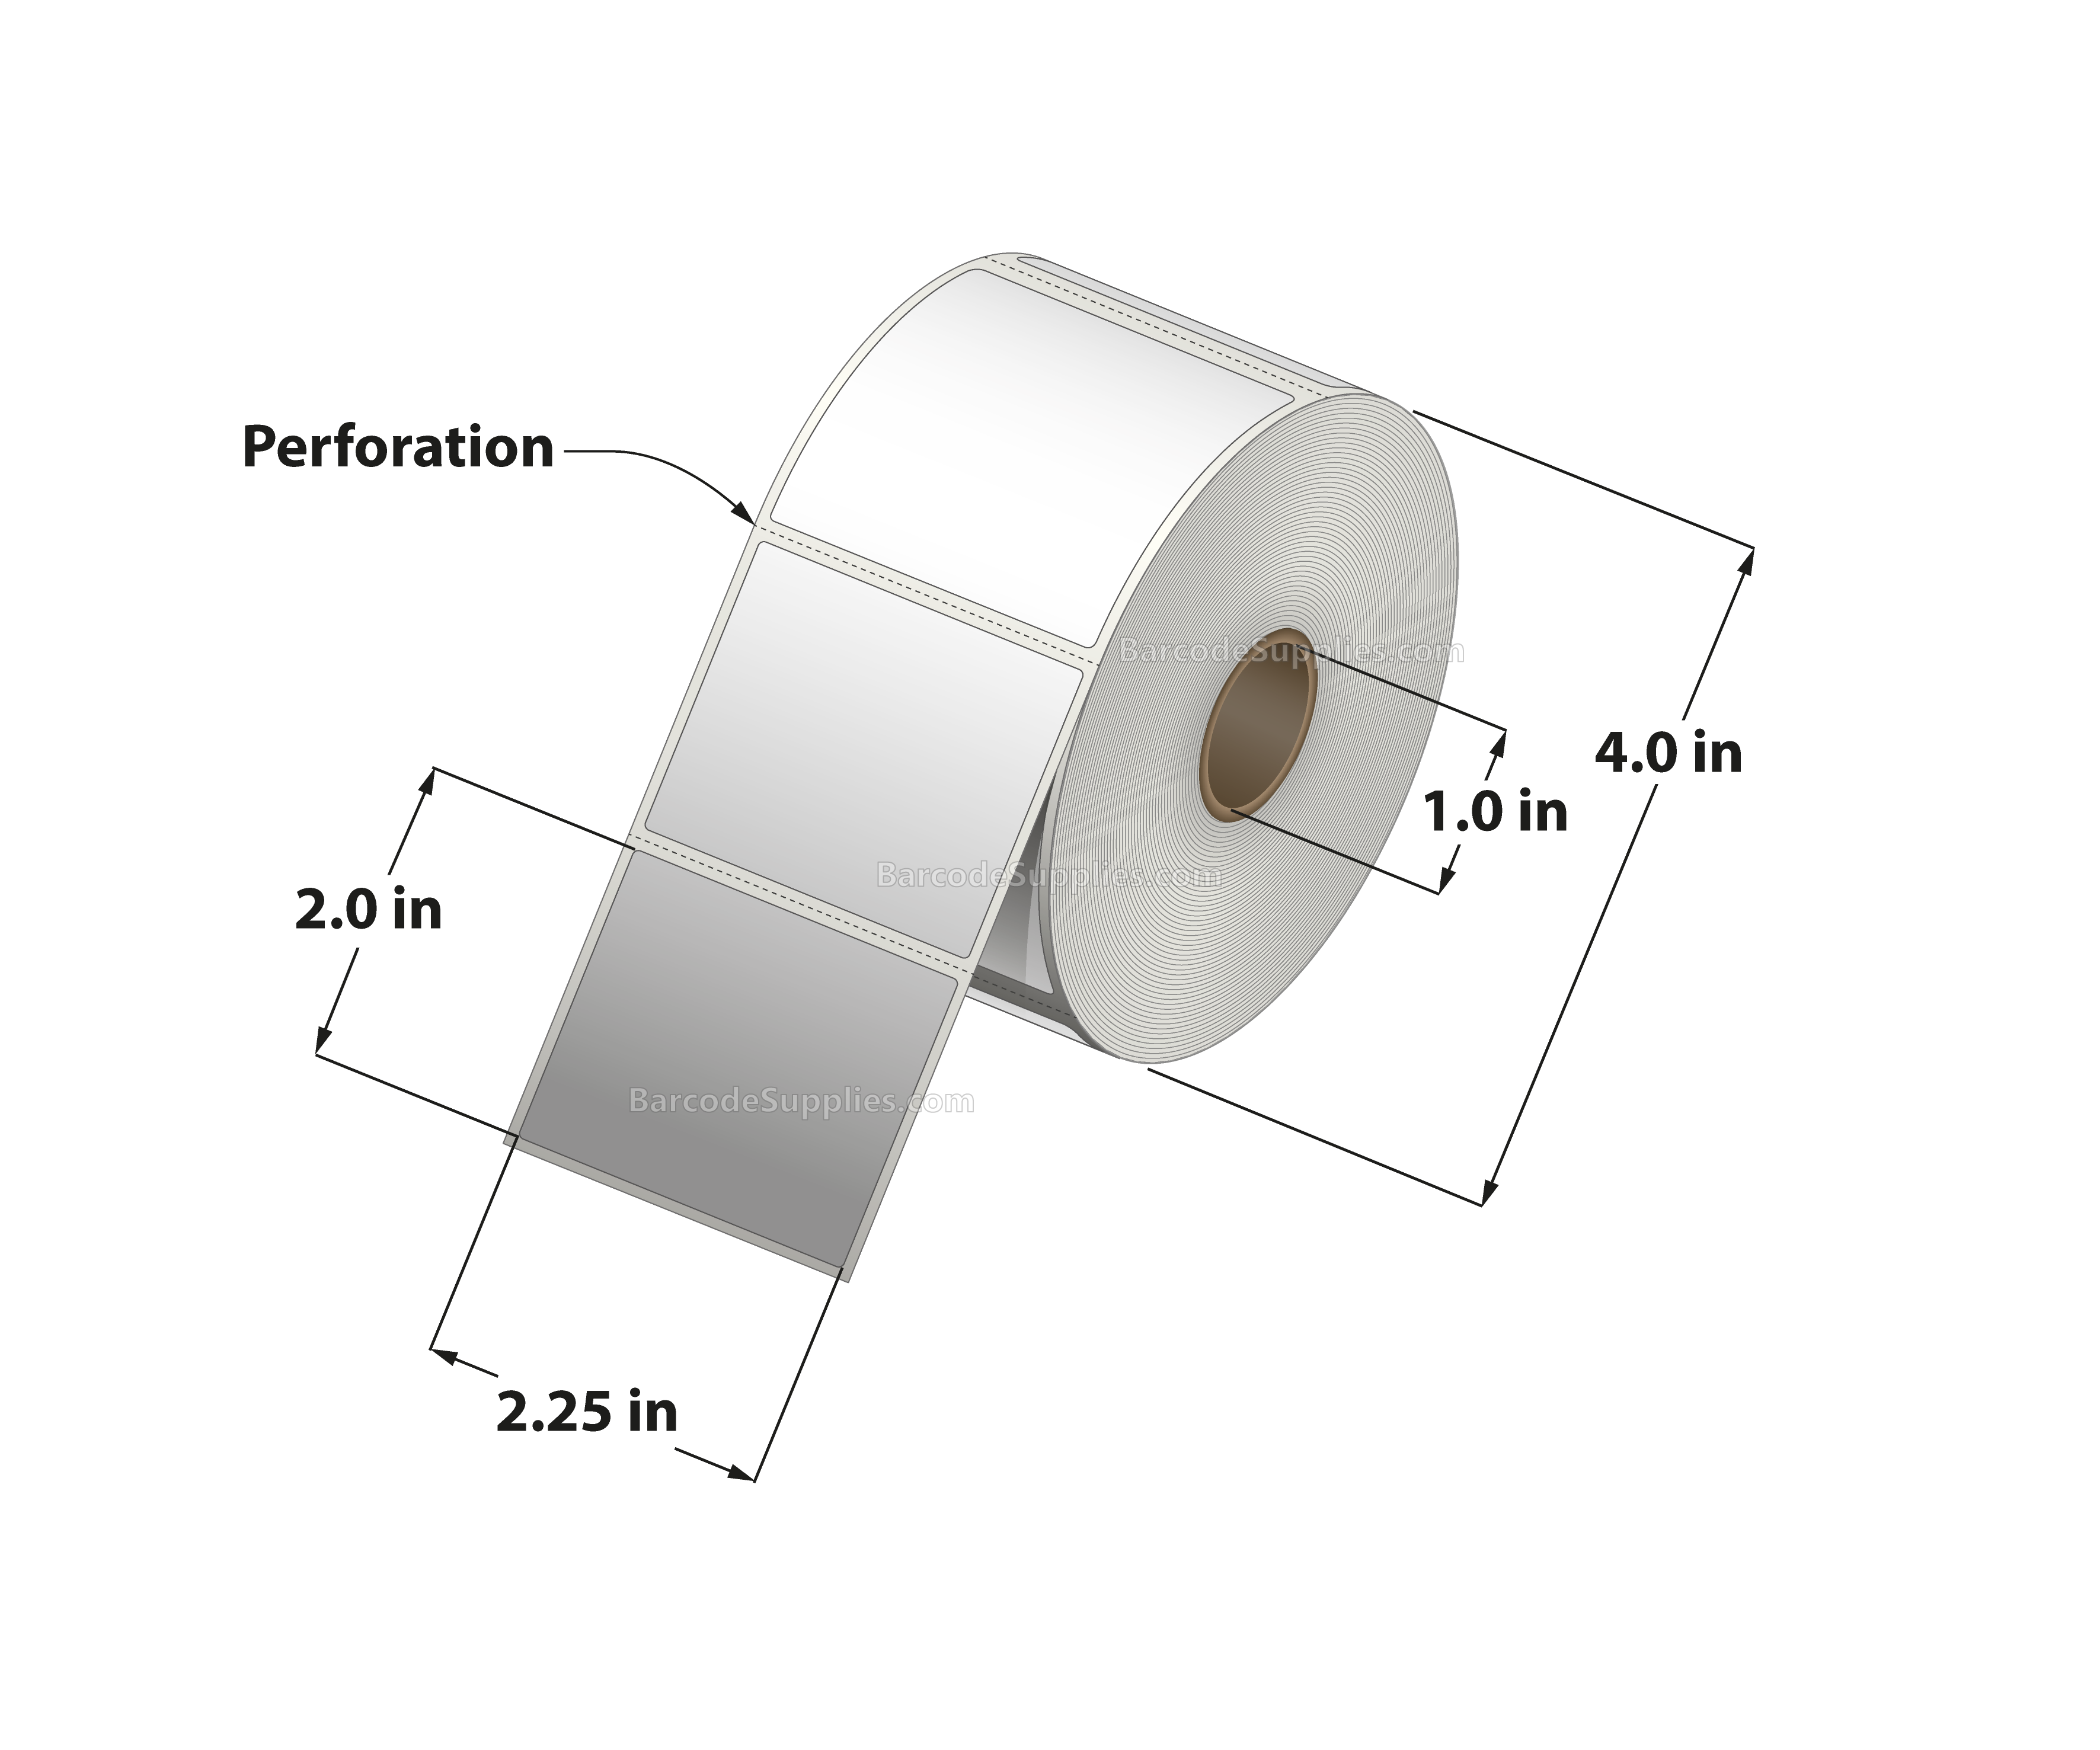 2.25 x 2 Direct Thermal White Labels With Acrylic Adhesive - Perforated - 735 Labels Per Roll - Carton Of 12 Rolls - 8820 Labels Total - MPN: RD-225-2-735-1 - BarcodeSource, Inc.